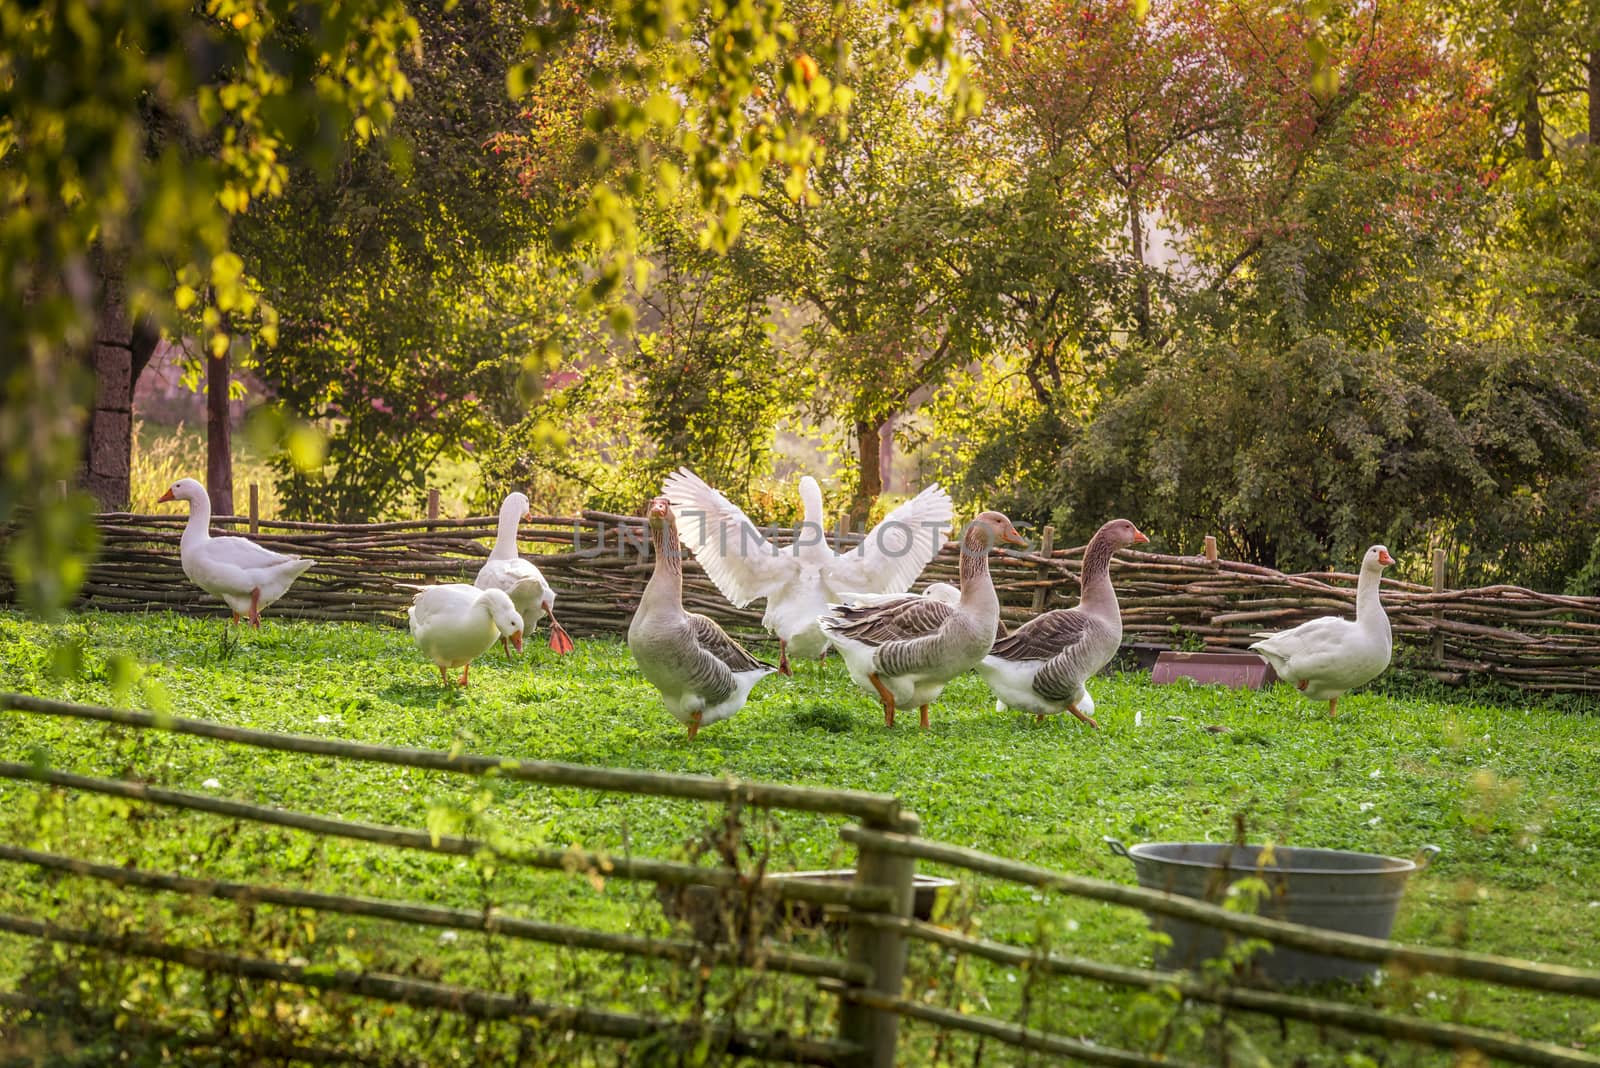 Group of geese at a small german bird farm, in a summer decor with green grass and trees, surrounded by a wattled fence